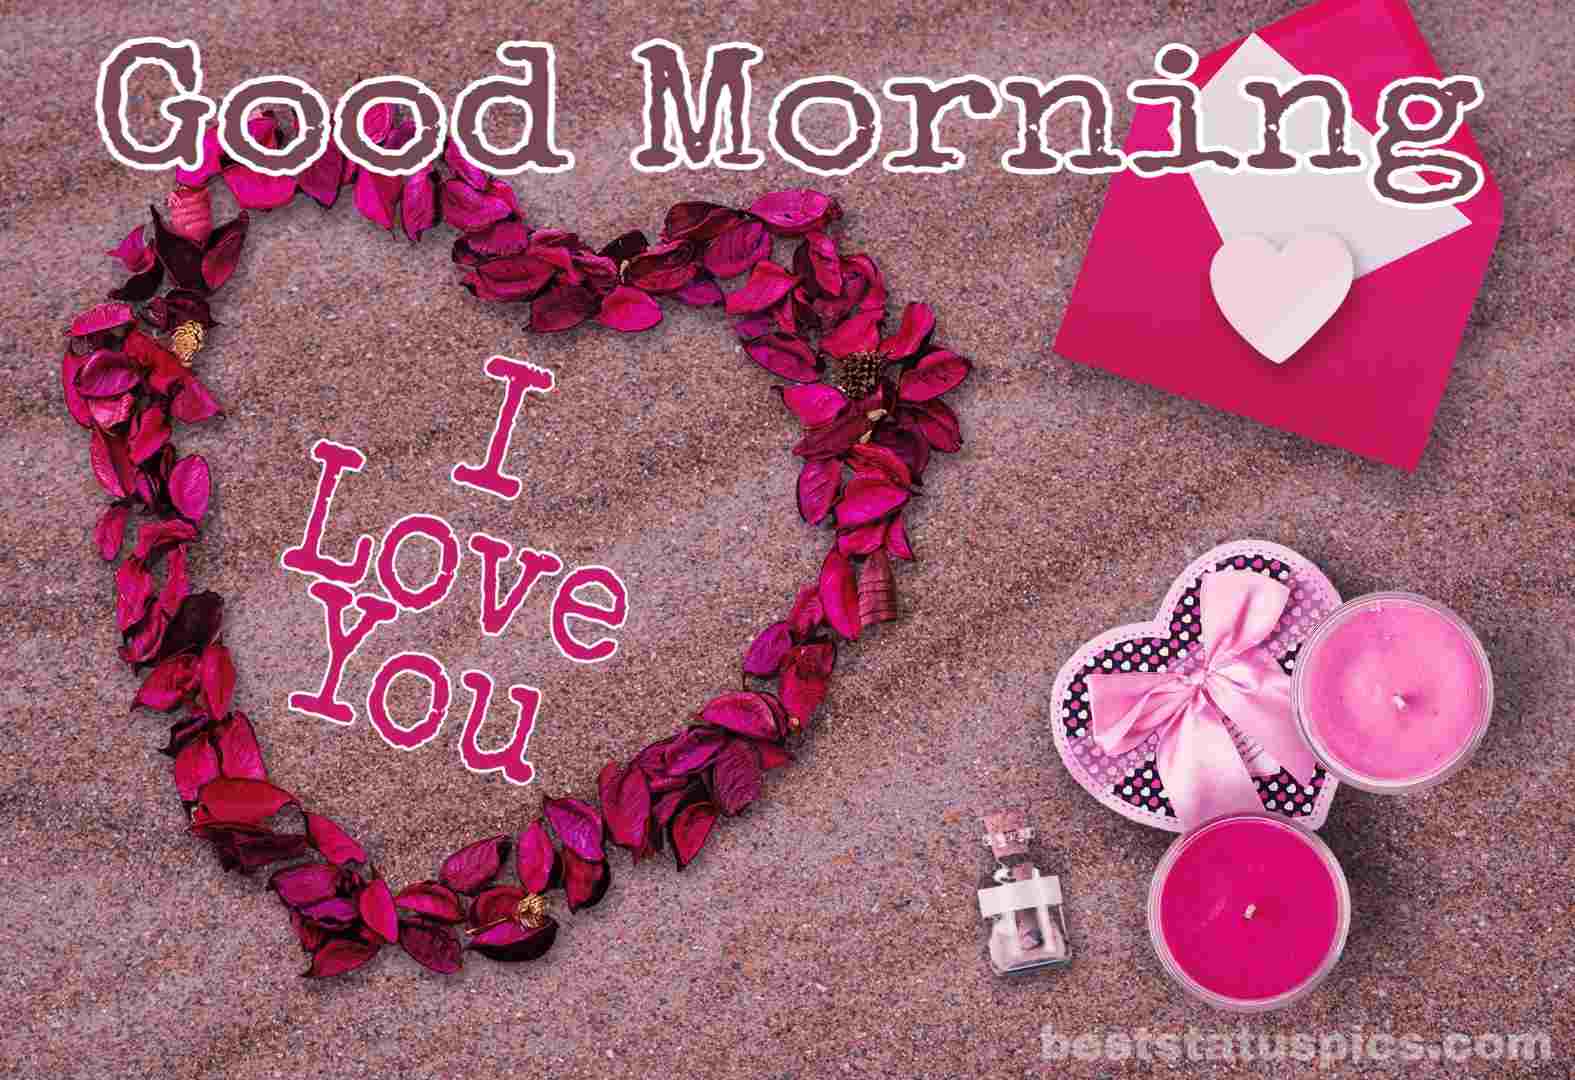 Top 51 Good Morning I Love You HD Images, WhatsApp DP - Best ...